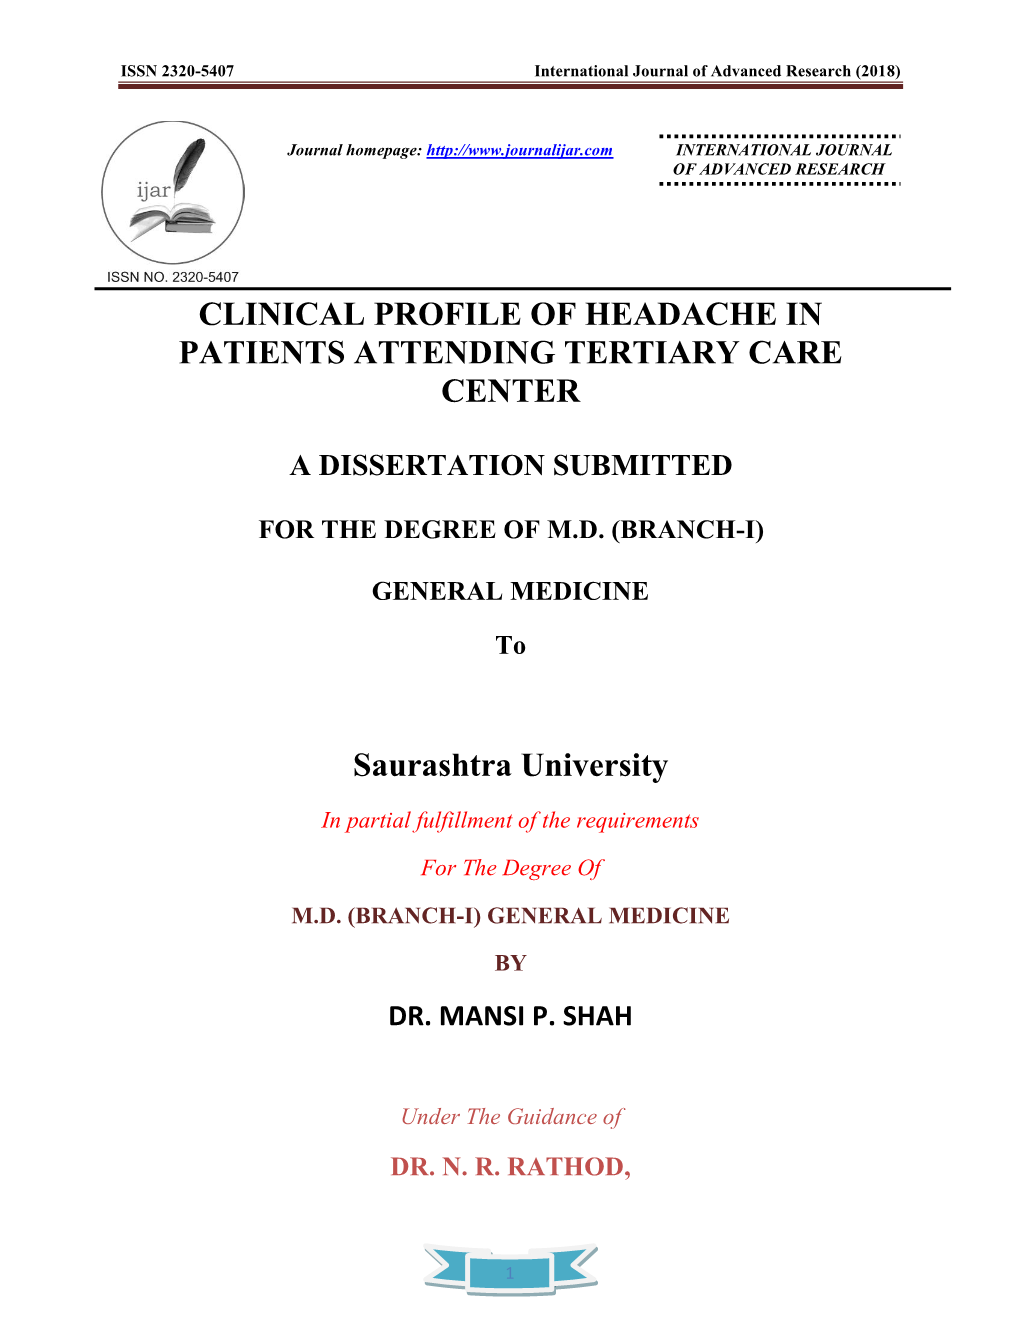 CLINICAL PROFILE of HEADACHE in PATIENTS ATTENDING TERTIARY CARE CENTER Saurashtra University